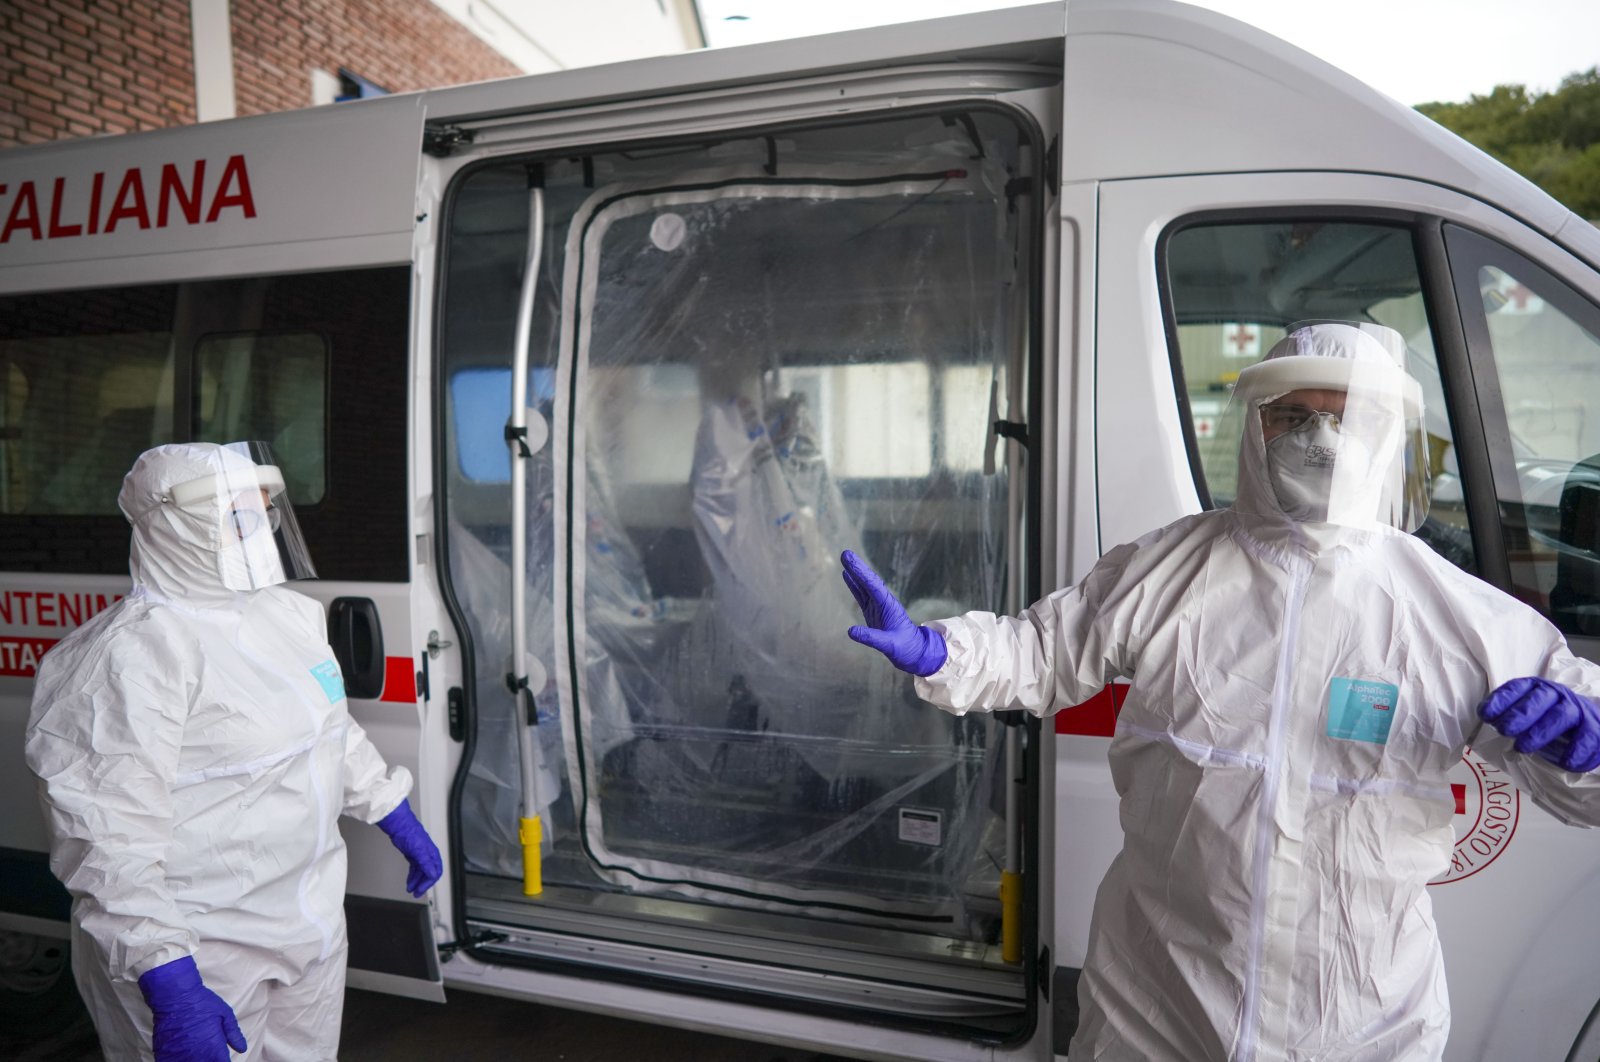 Red Cross personnel prepare for the transport of a Coronavirus patient during a simulation, in Rome, Friday, March 6, 2020. (AP Photo)